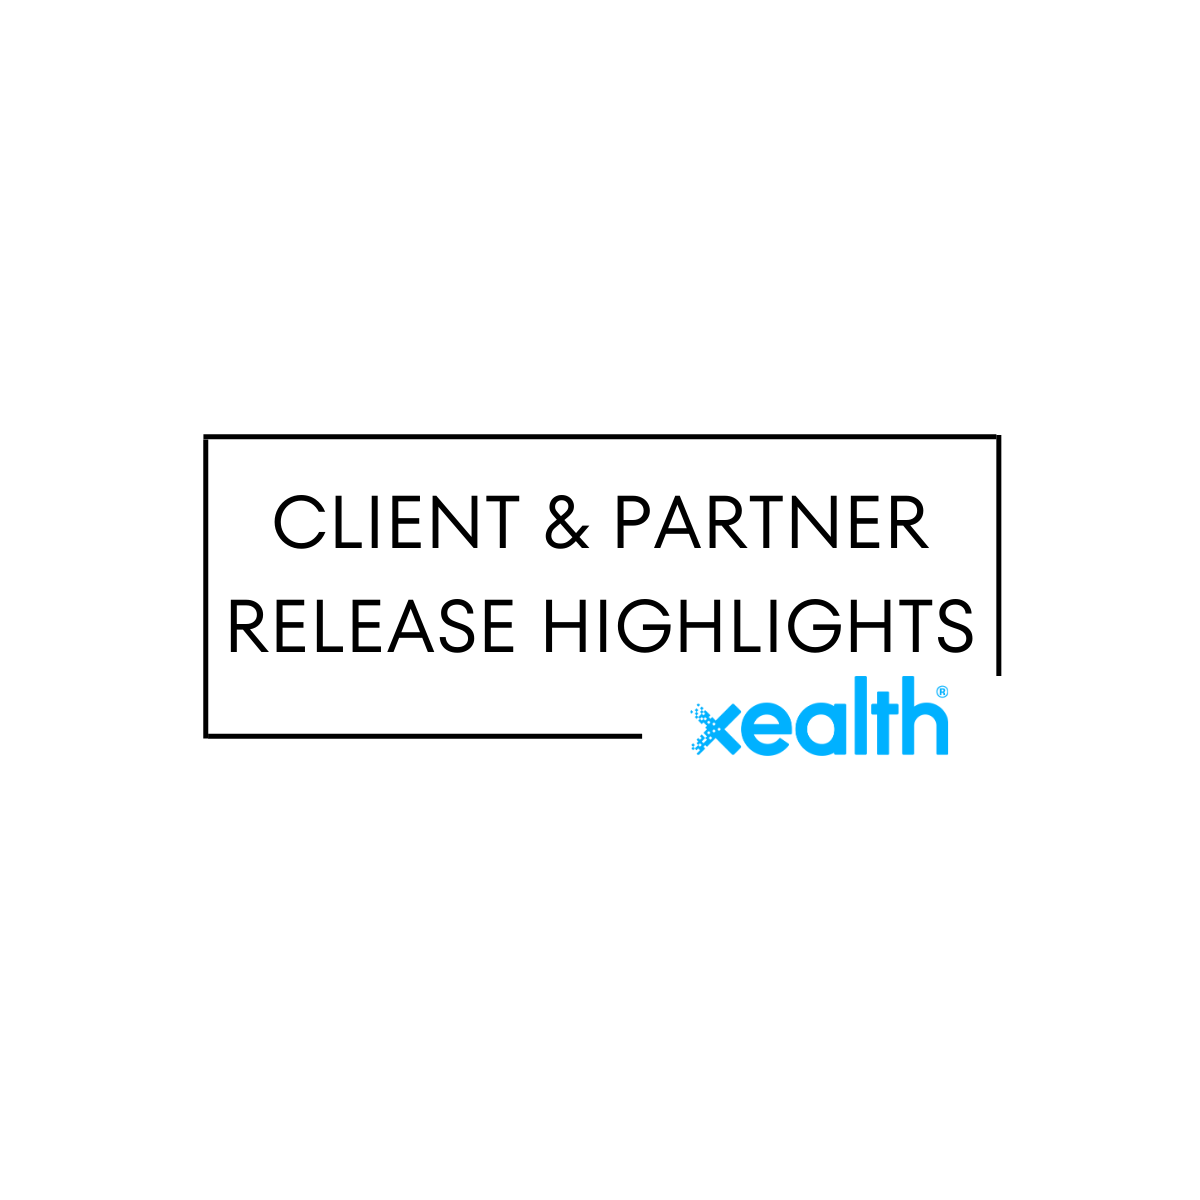 Client & Partner Highlights from the Field